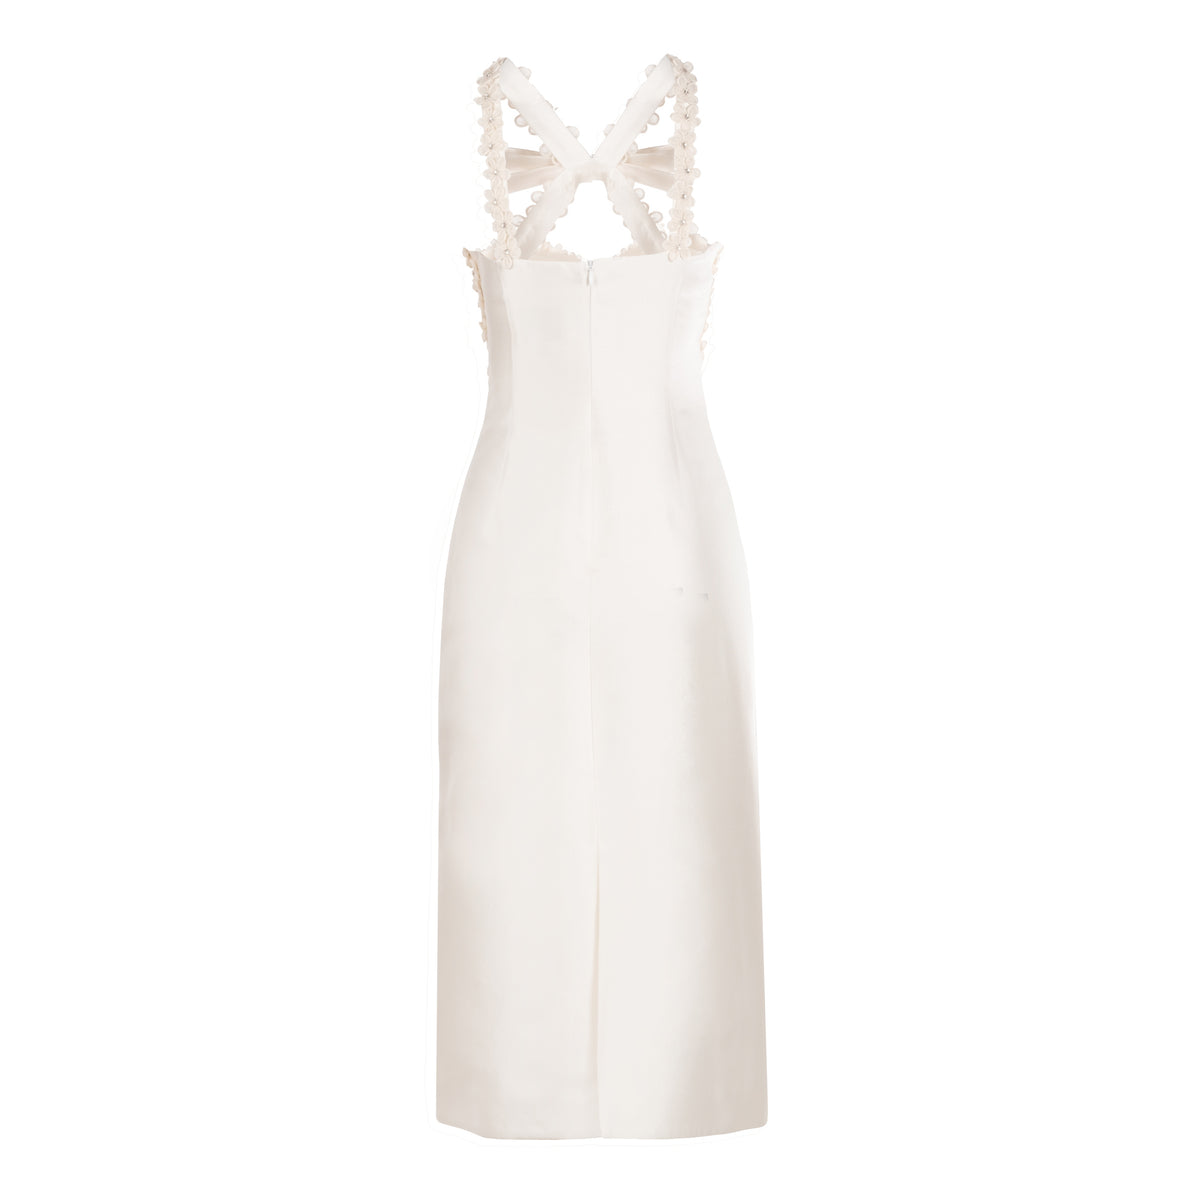 Delphine Dress in Ivory Silk Wool with Floral Appliqué